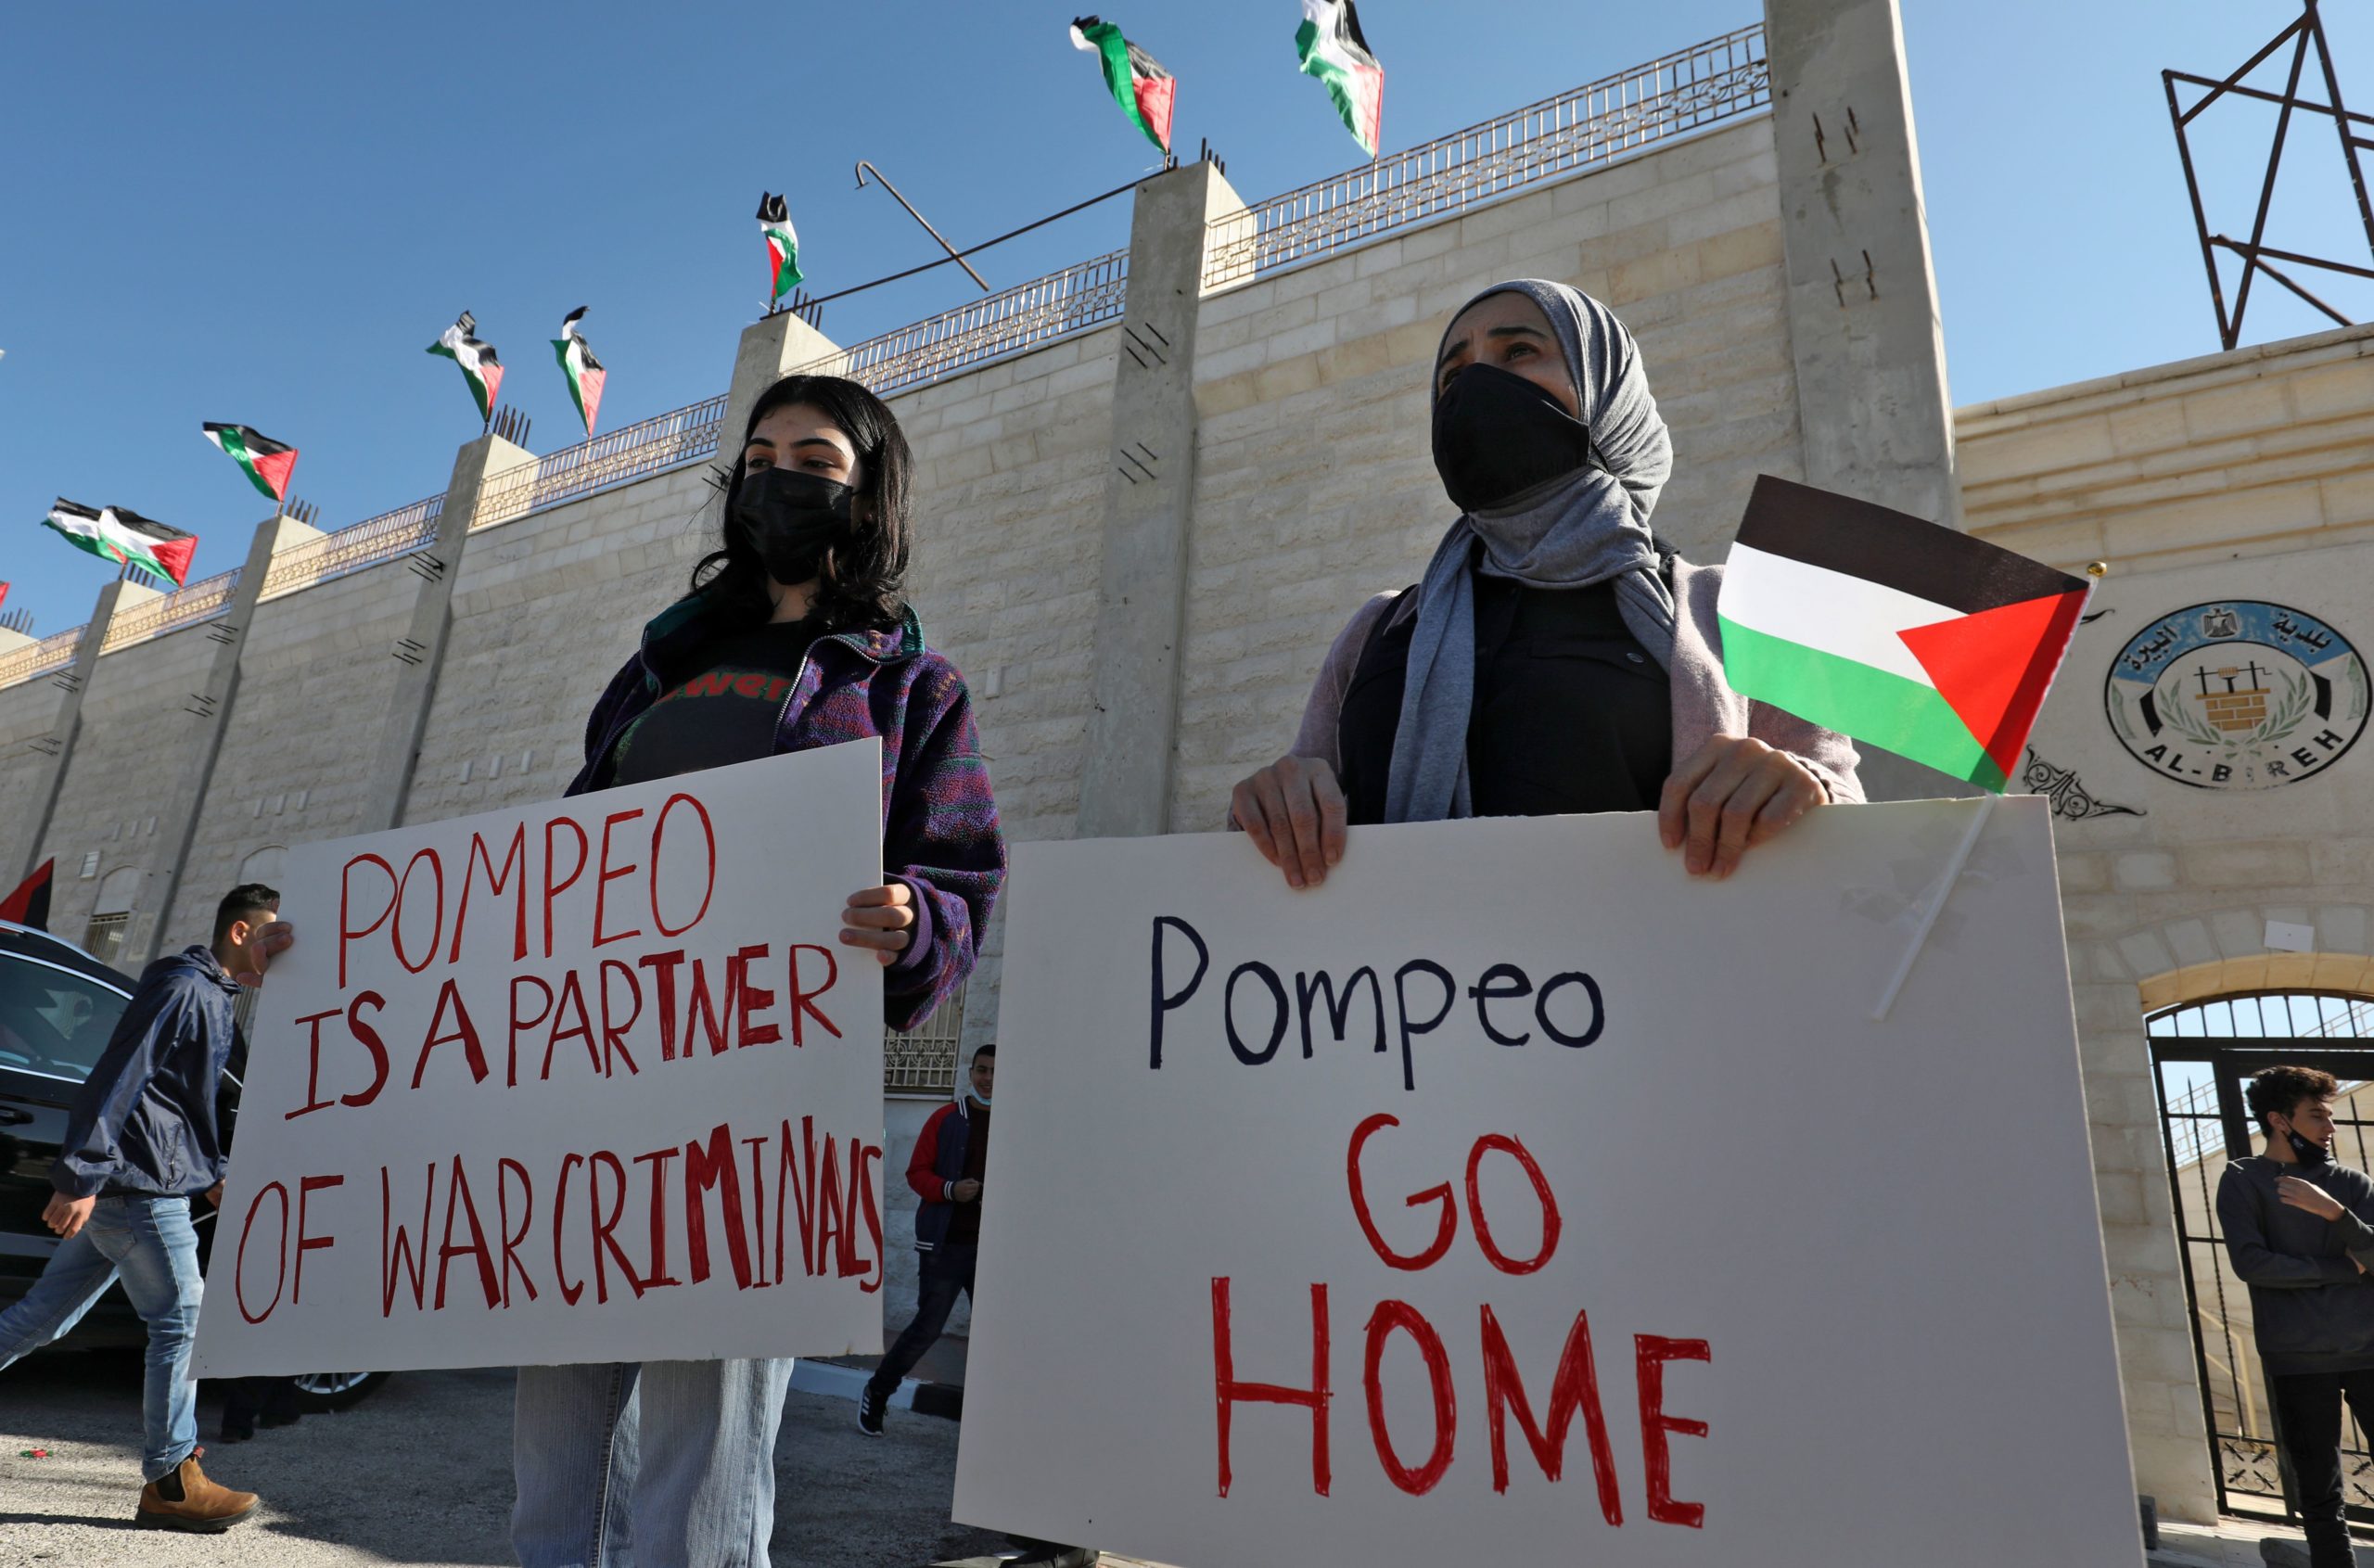 Palestinians demonstrate near the Israeli settlement against Sec. of State Mike Pompeo's Wednesday visit. (Abbas Momani/AFP via Getty Images)